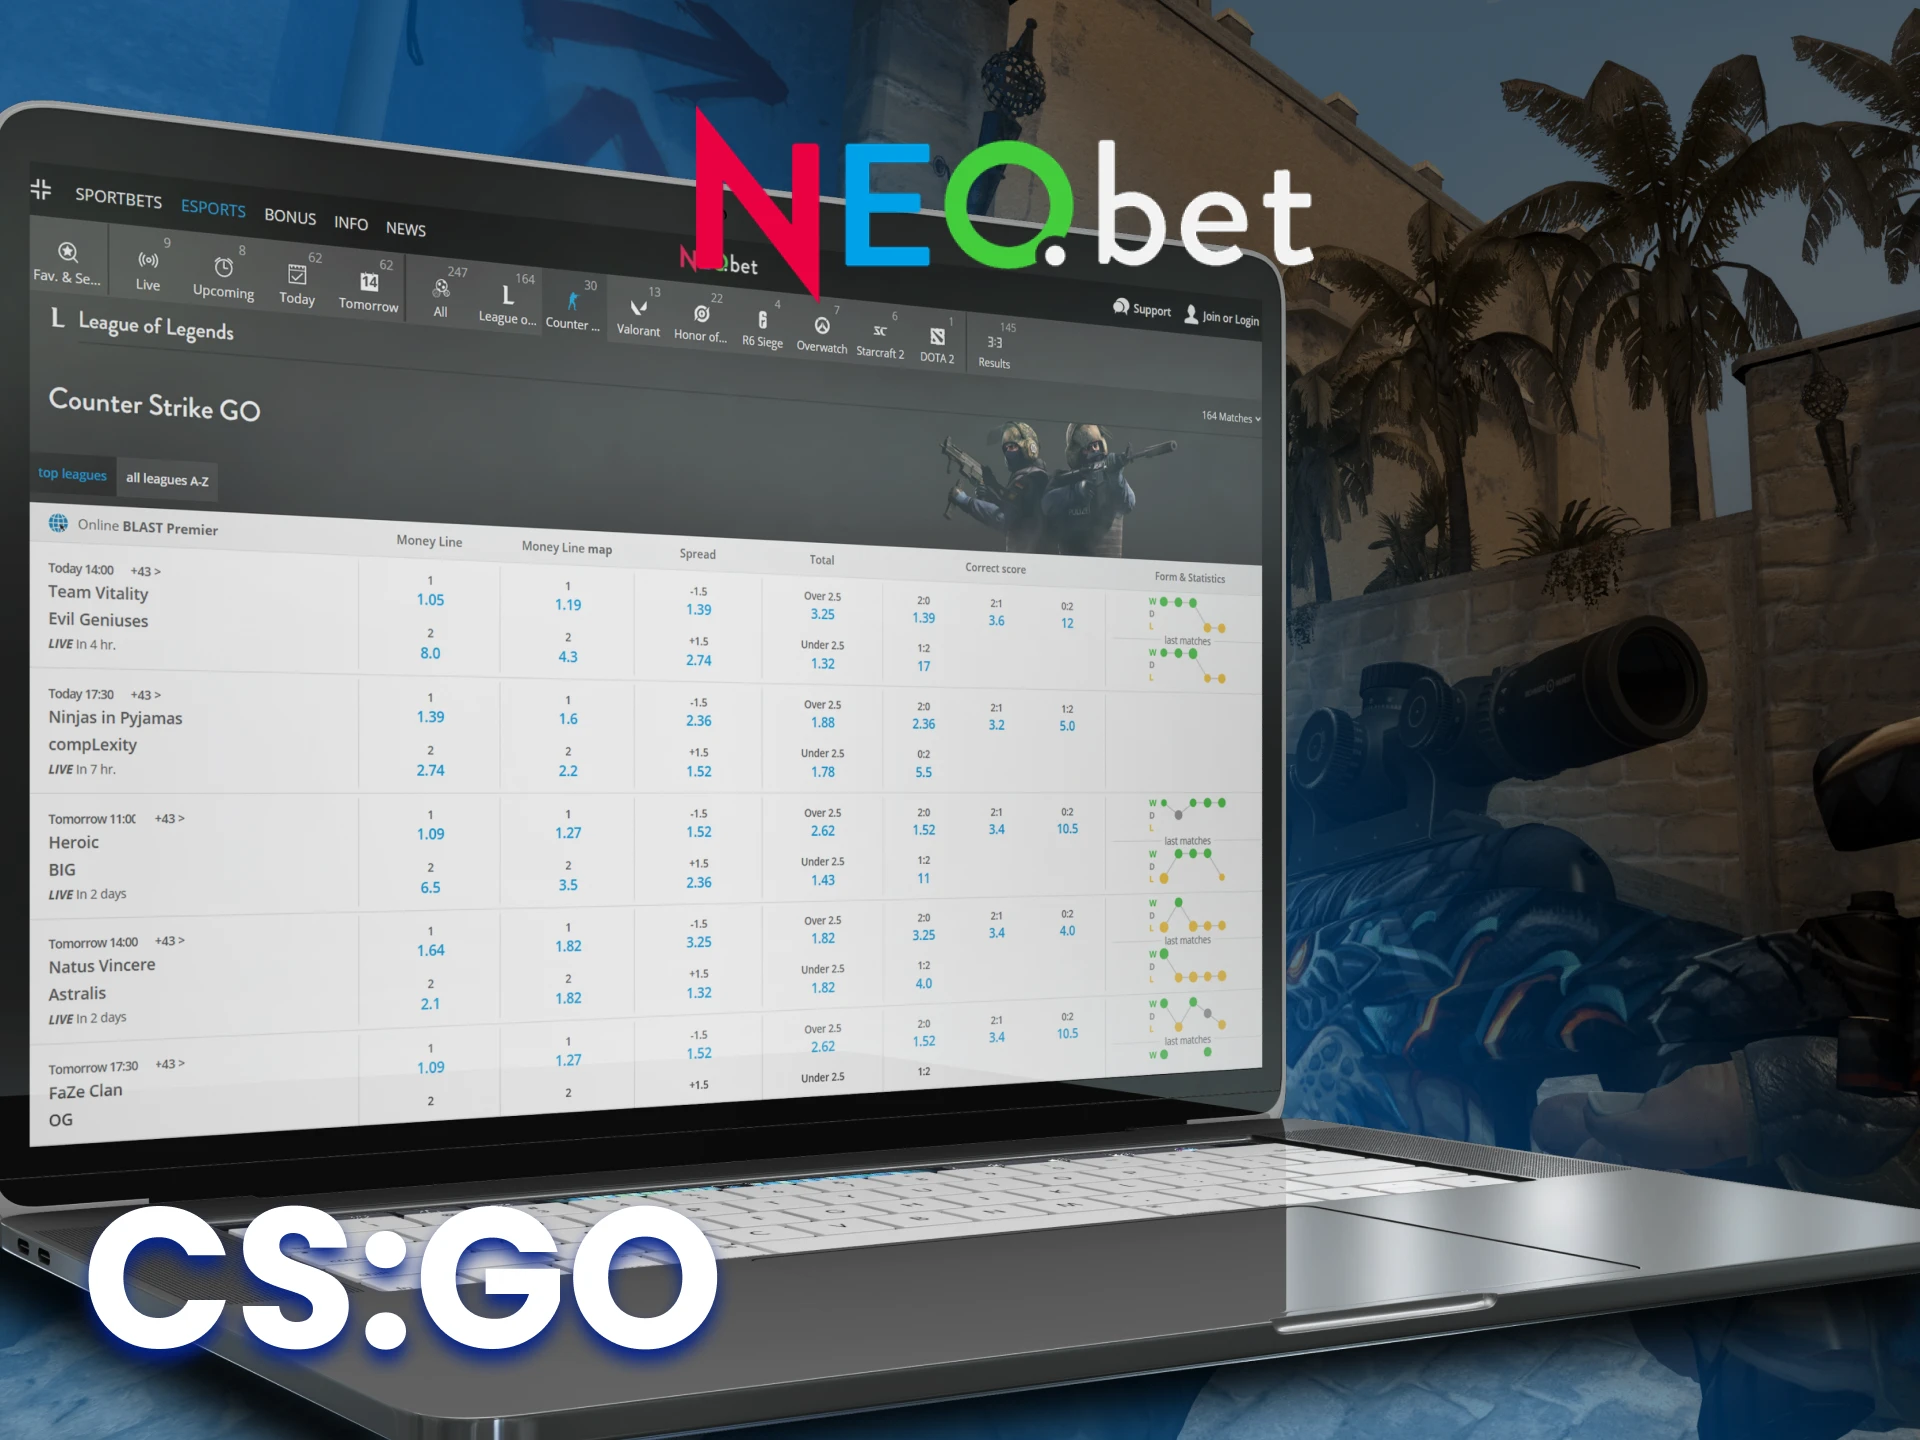 Place your bets on CS:GO with NEO.bet.